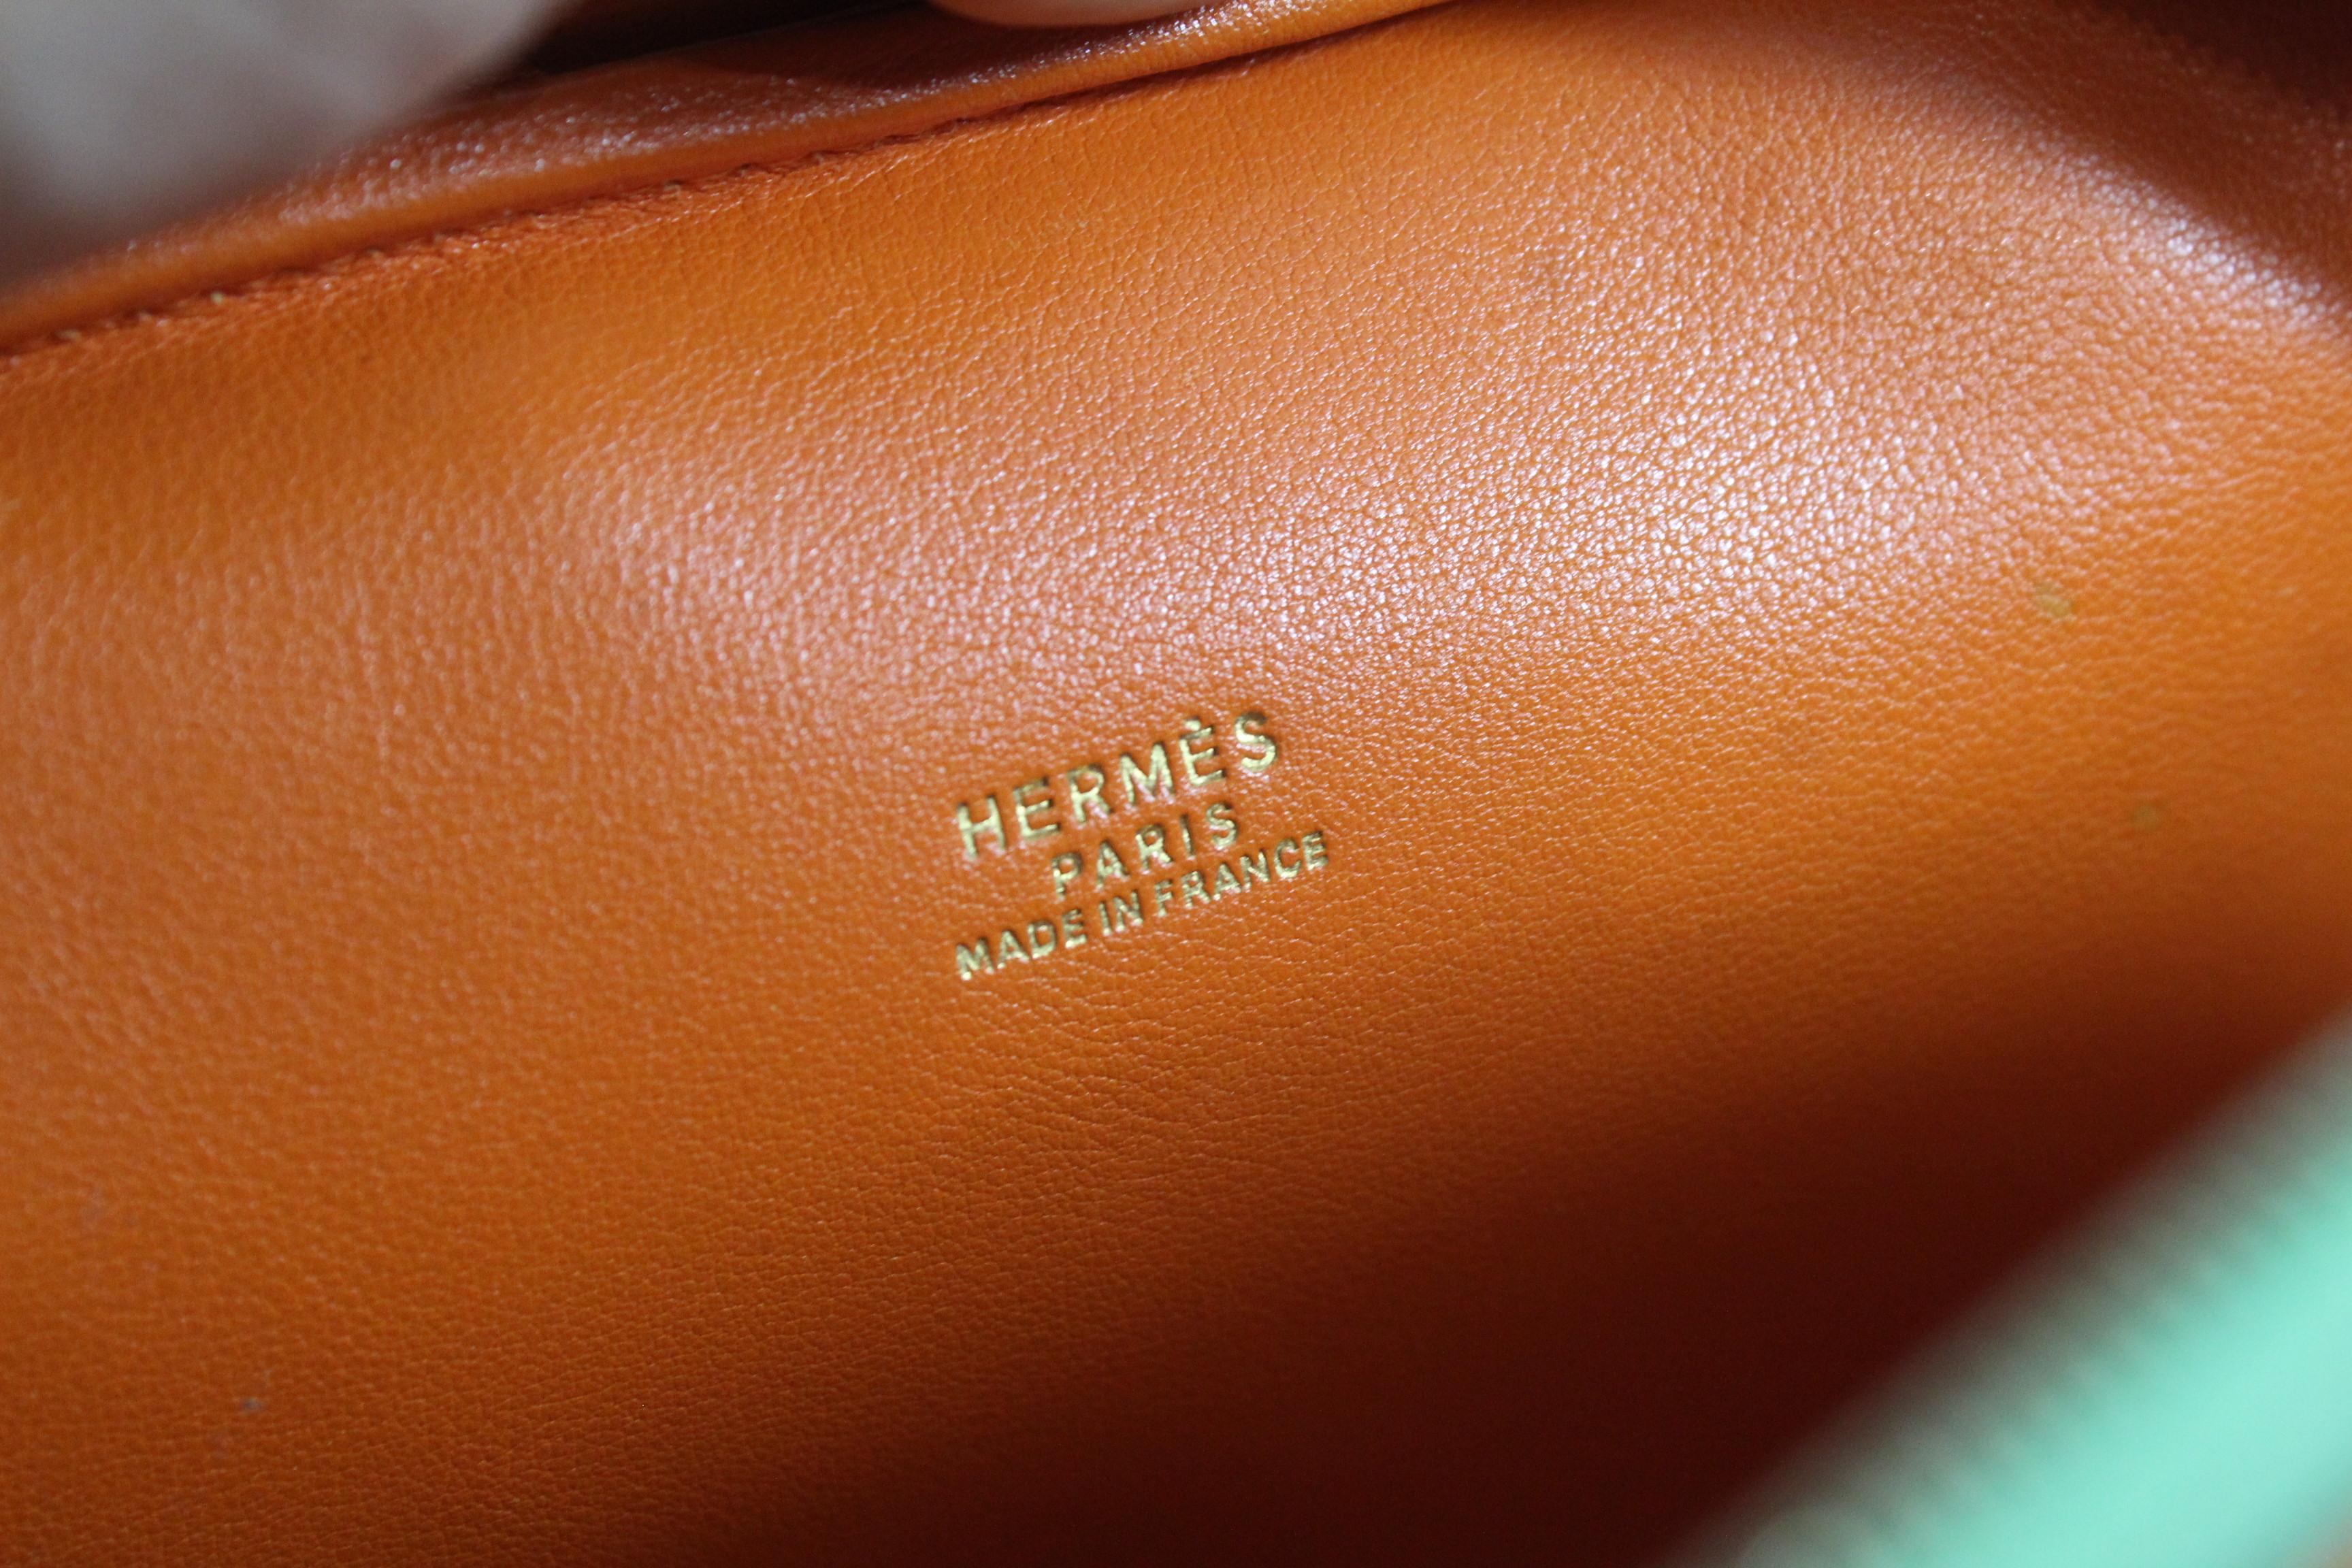 Lovely rare Hermes mini plume bag in green and orange leather.

Bag form 1994.

Really good condition, jusst some light signs of use.

Comes with dust bag

Size 20 cm x15 cm